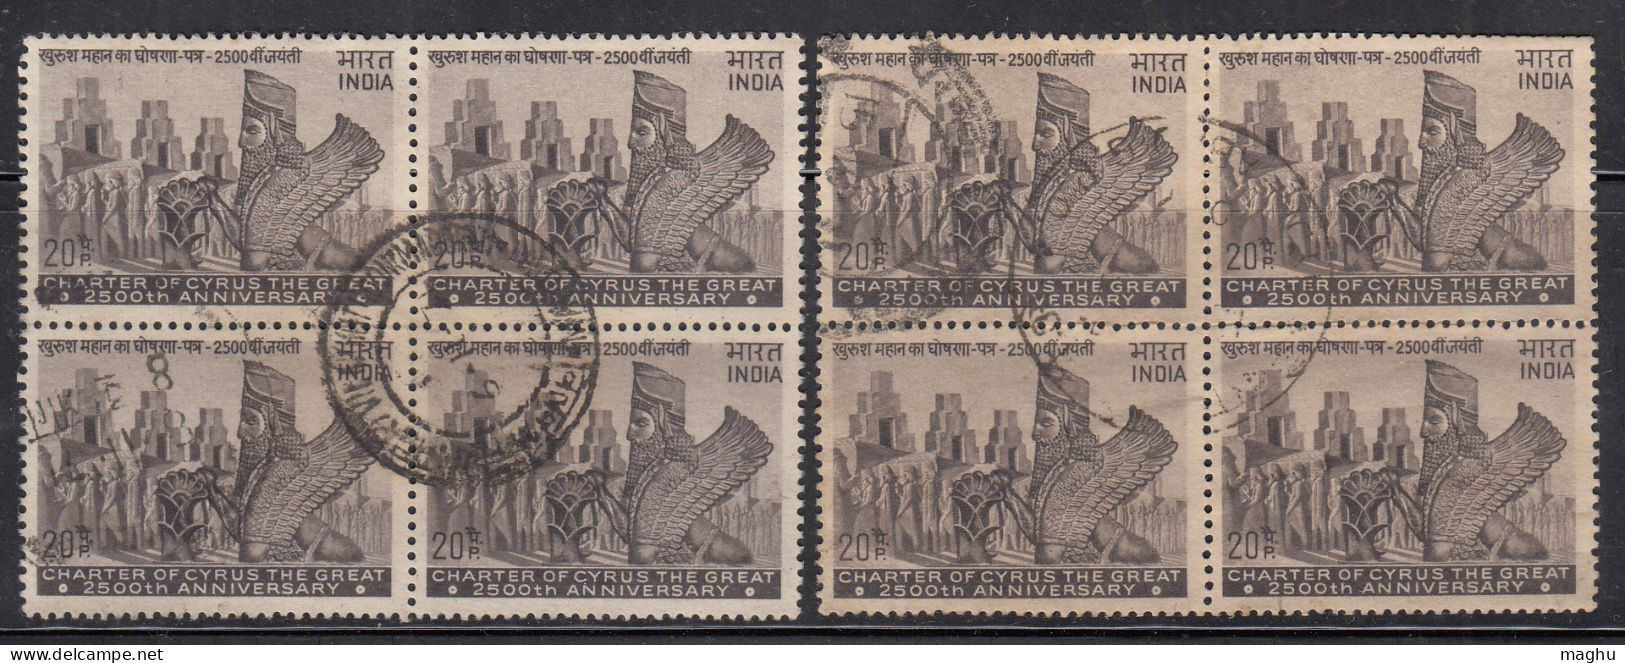 Block Of 4 X 2 , 2500TH ANNIV OF CHARTER OF CYRUS THE GREAT FOUNDER, PERSIAN EMPIRE Ruler, India 1971 - Hojas Bloque